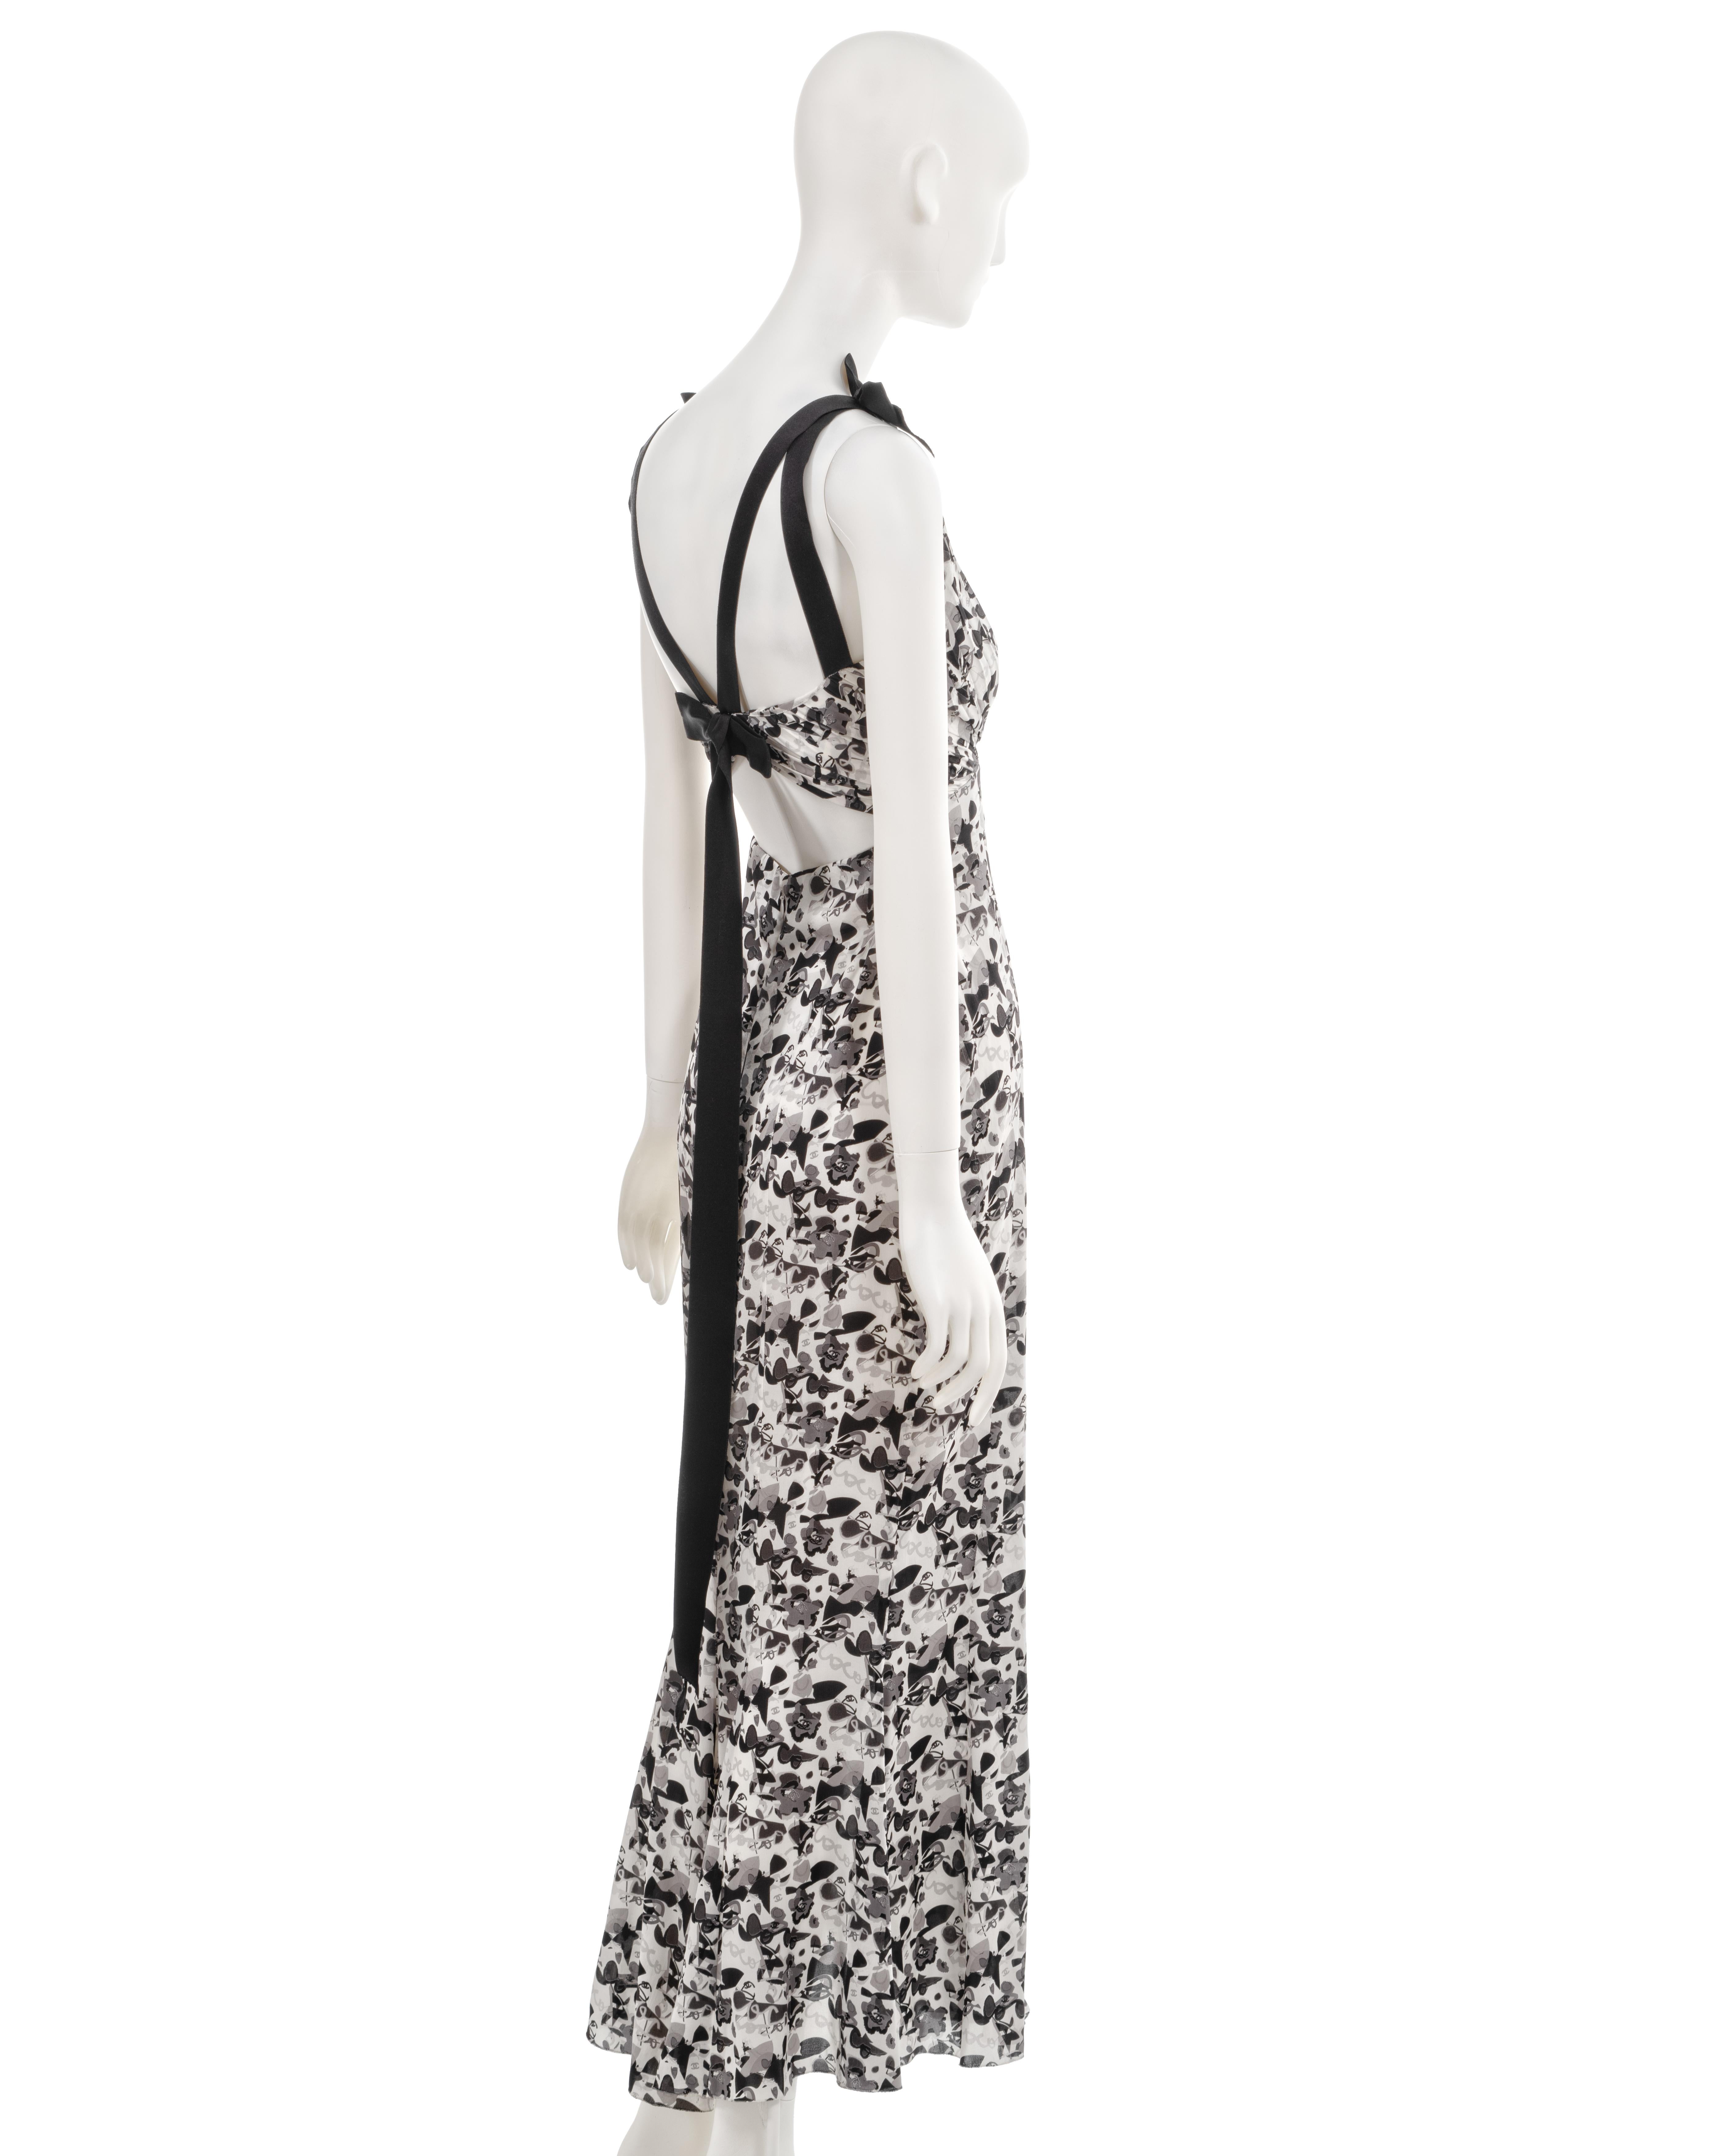 Chanel by Karl Lagerfeld white printed silk evening dress with bows, ss 2005  For Sale 3